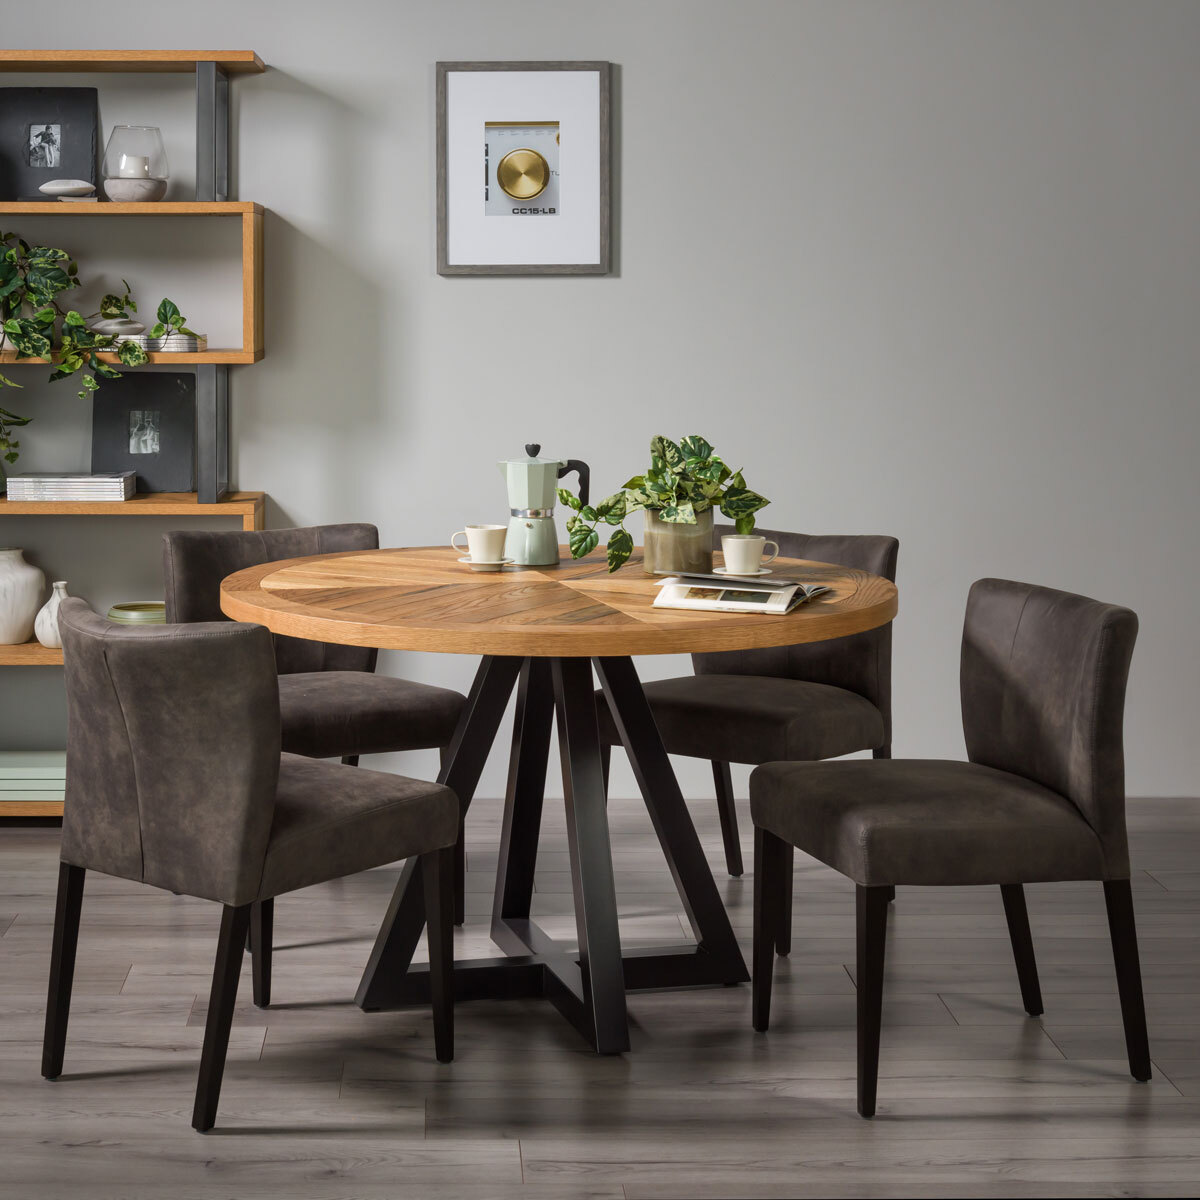 Bentley Designs Chevron Rustic Oak, Round Kitchen Tables And Chairs Uk